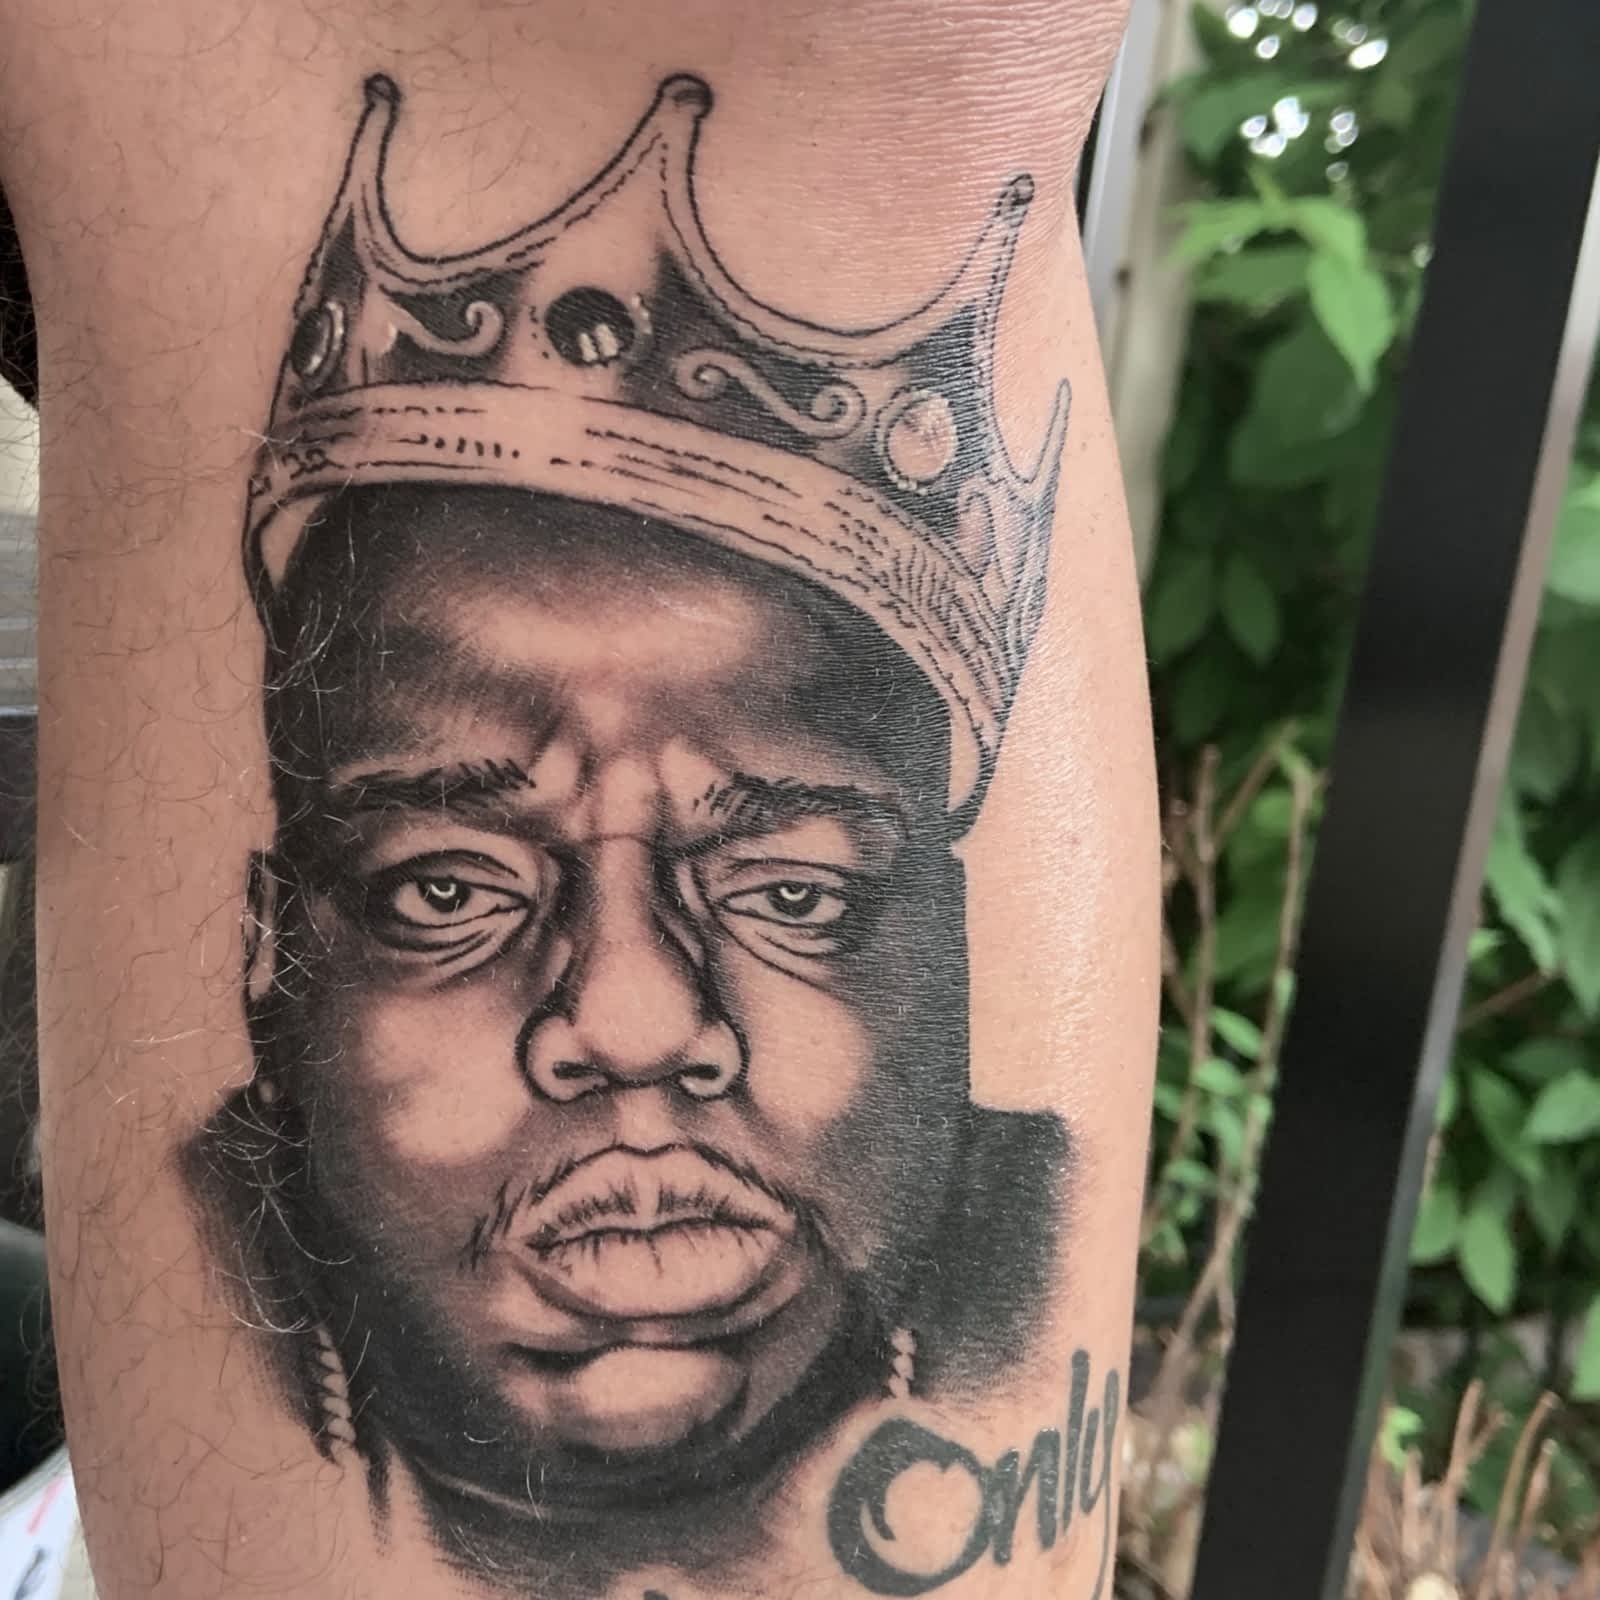 Tattoo uploaded by Ross Howerton  An awesome portrait of Biggie Smalls by  Jeremy D IGjeremyd BiggieSmalls blackandgrey celebrity JeremyD  portraiture quotes  Tattoodo